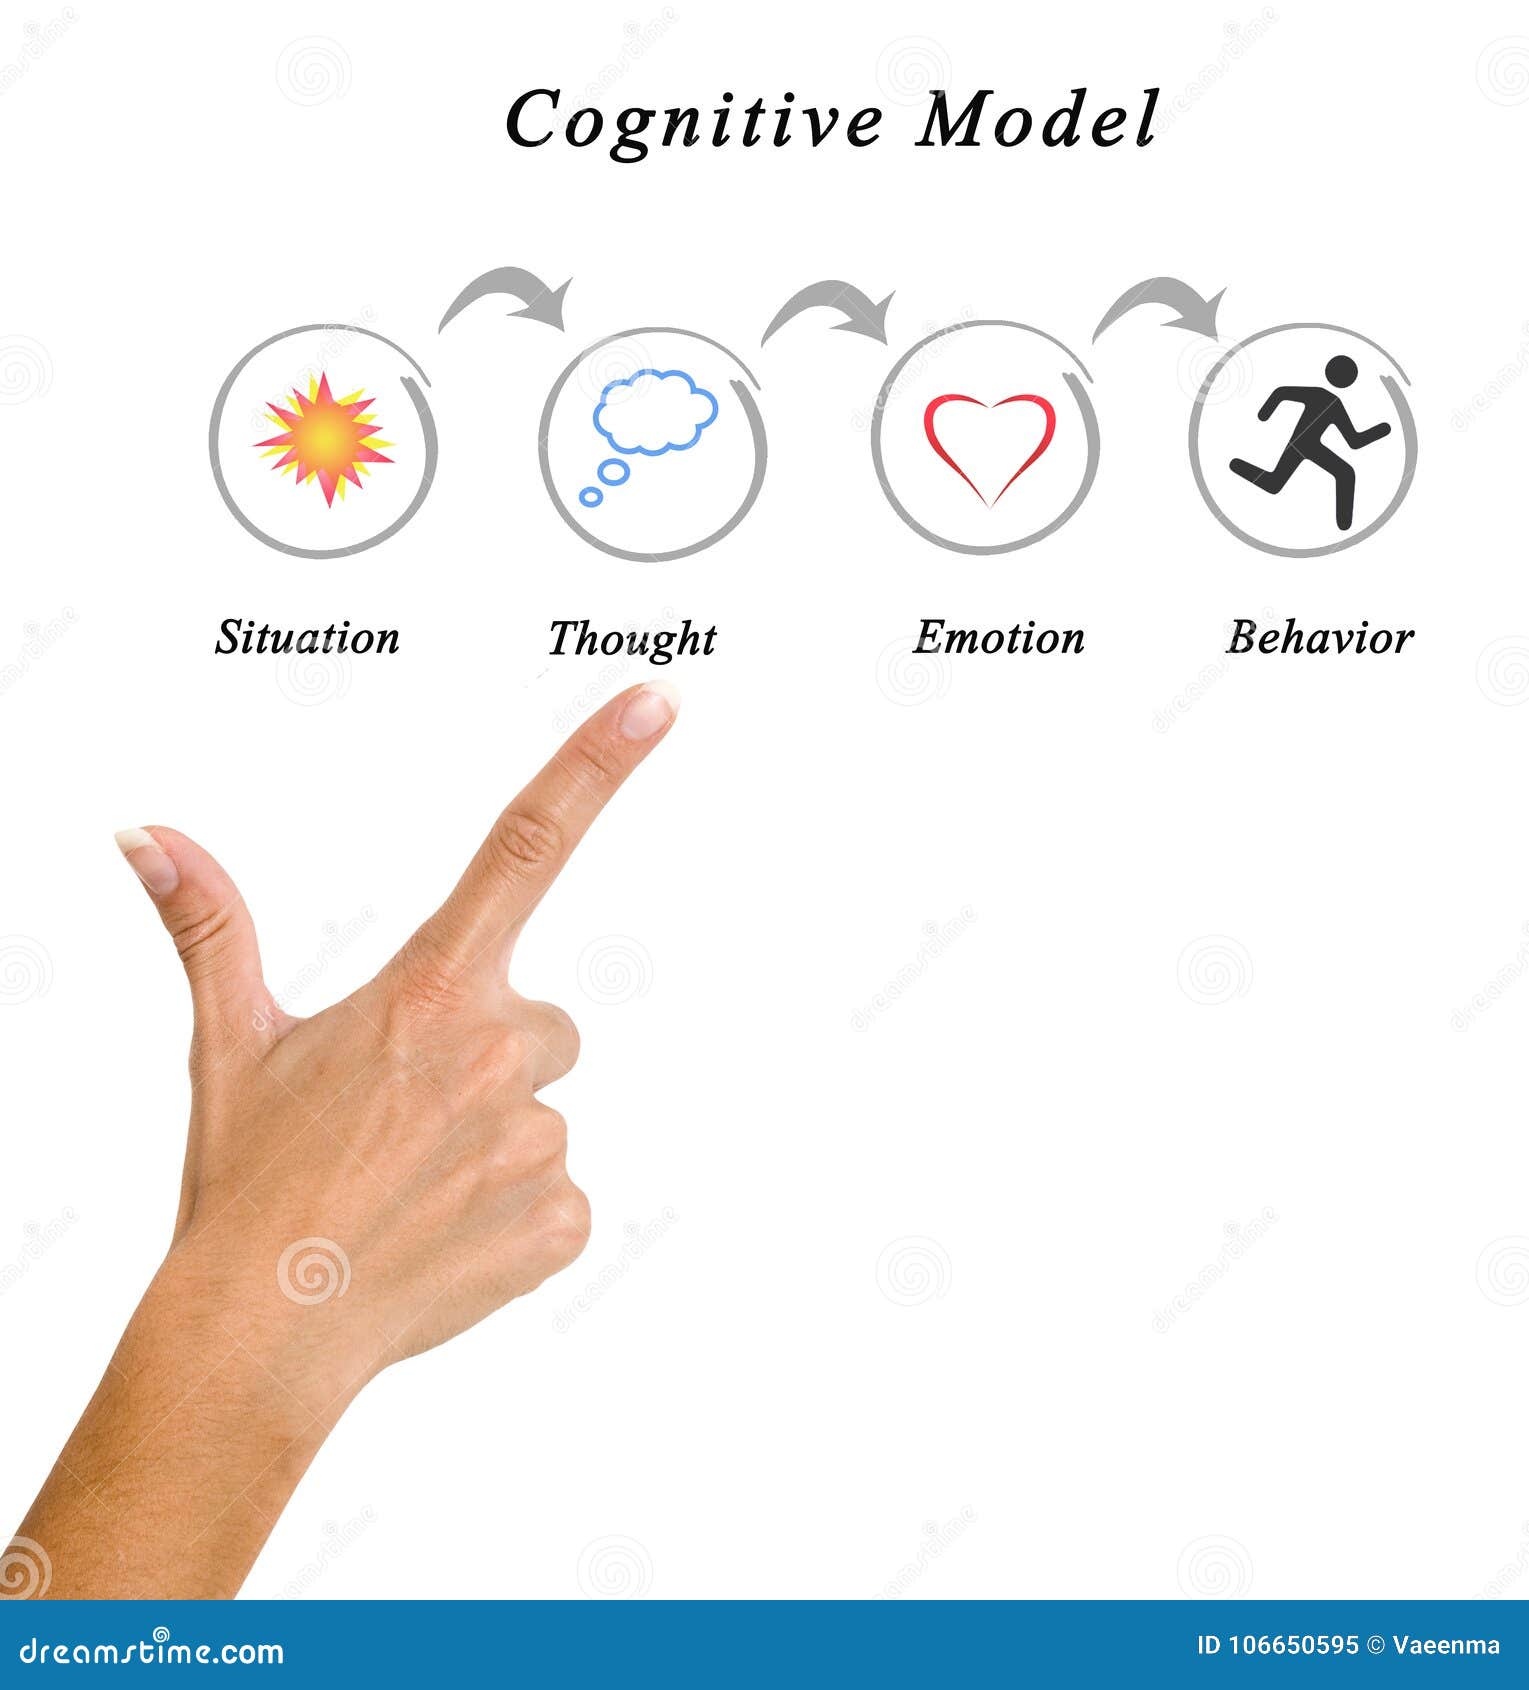 components of cognitive model